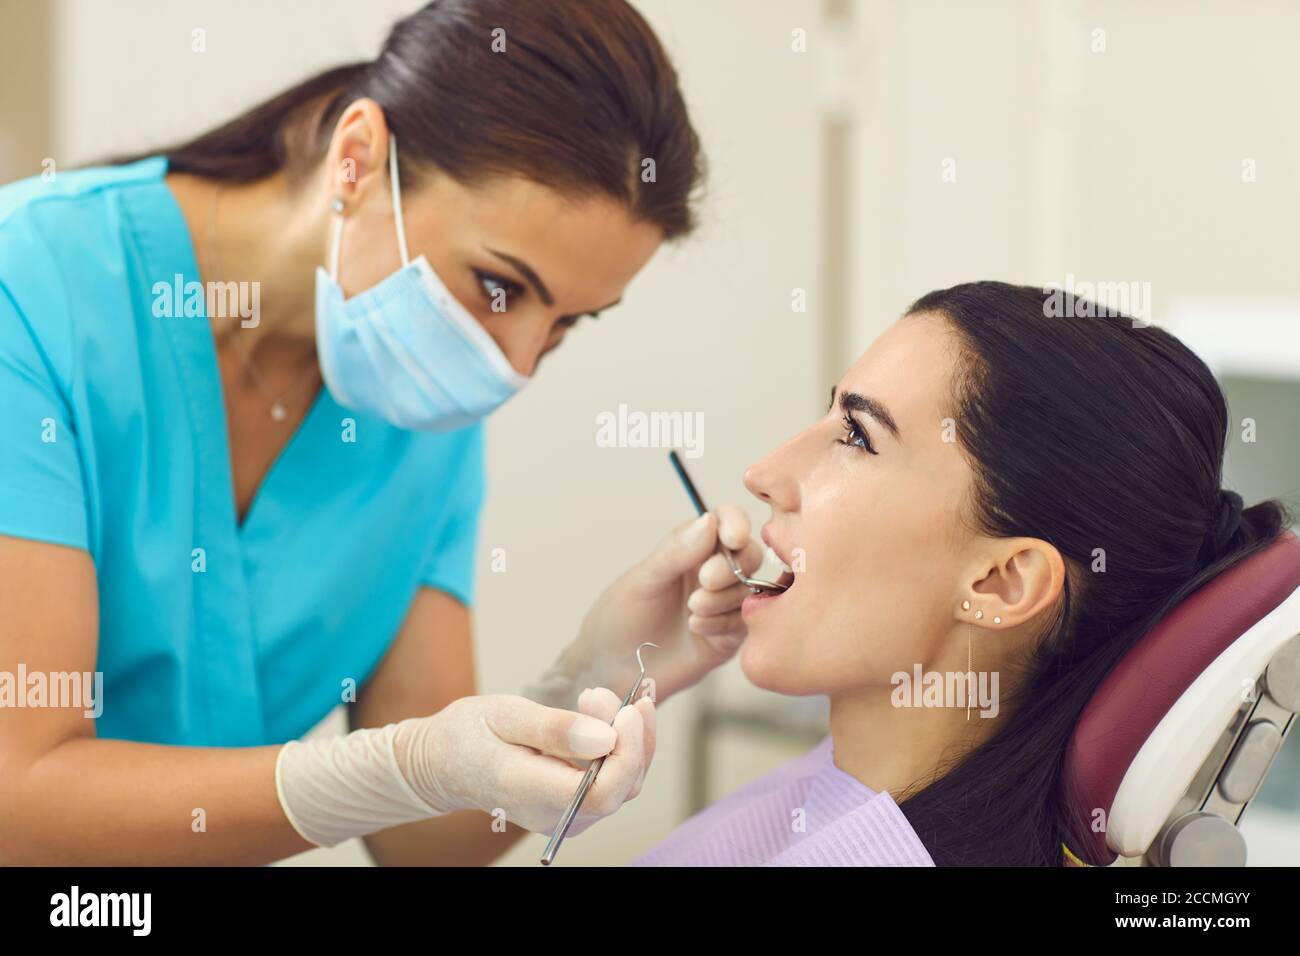 Dentist examining patients teeth with mirror in clinic, side view Stock Photo